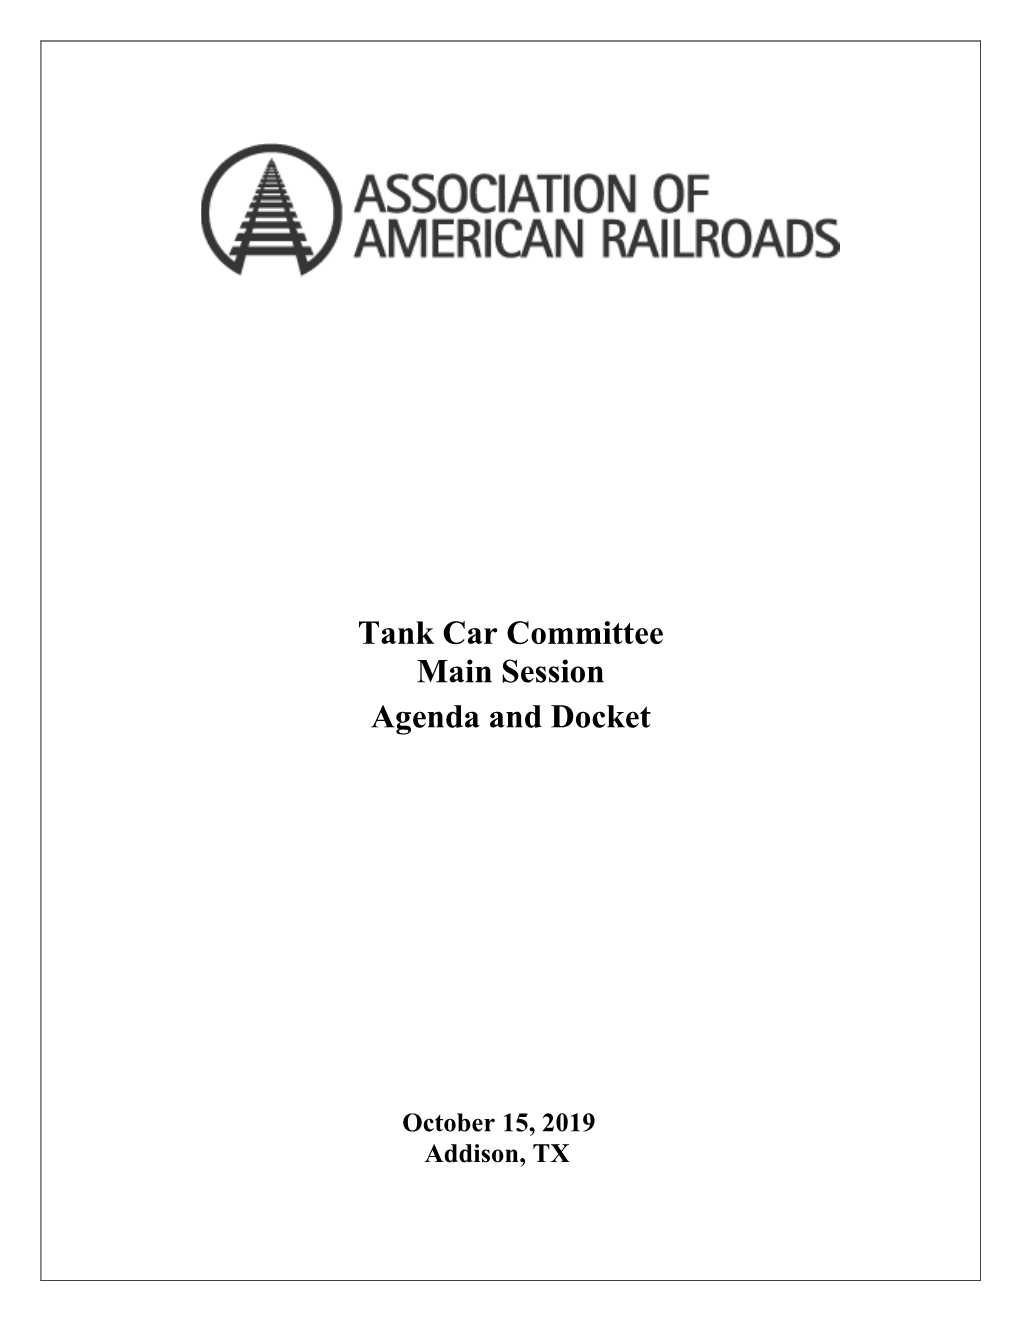 Tank Car Committee Main Session Agenda and Docket